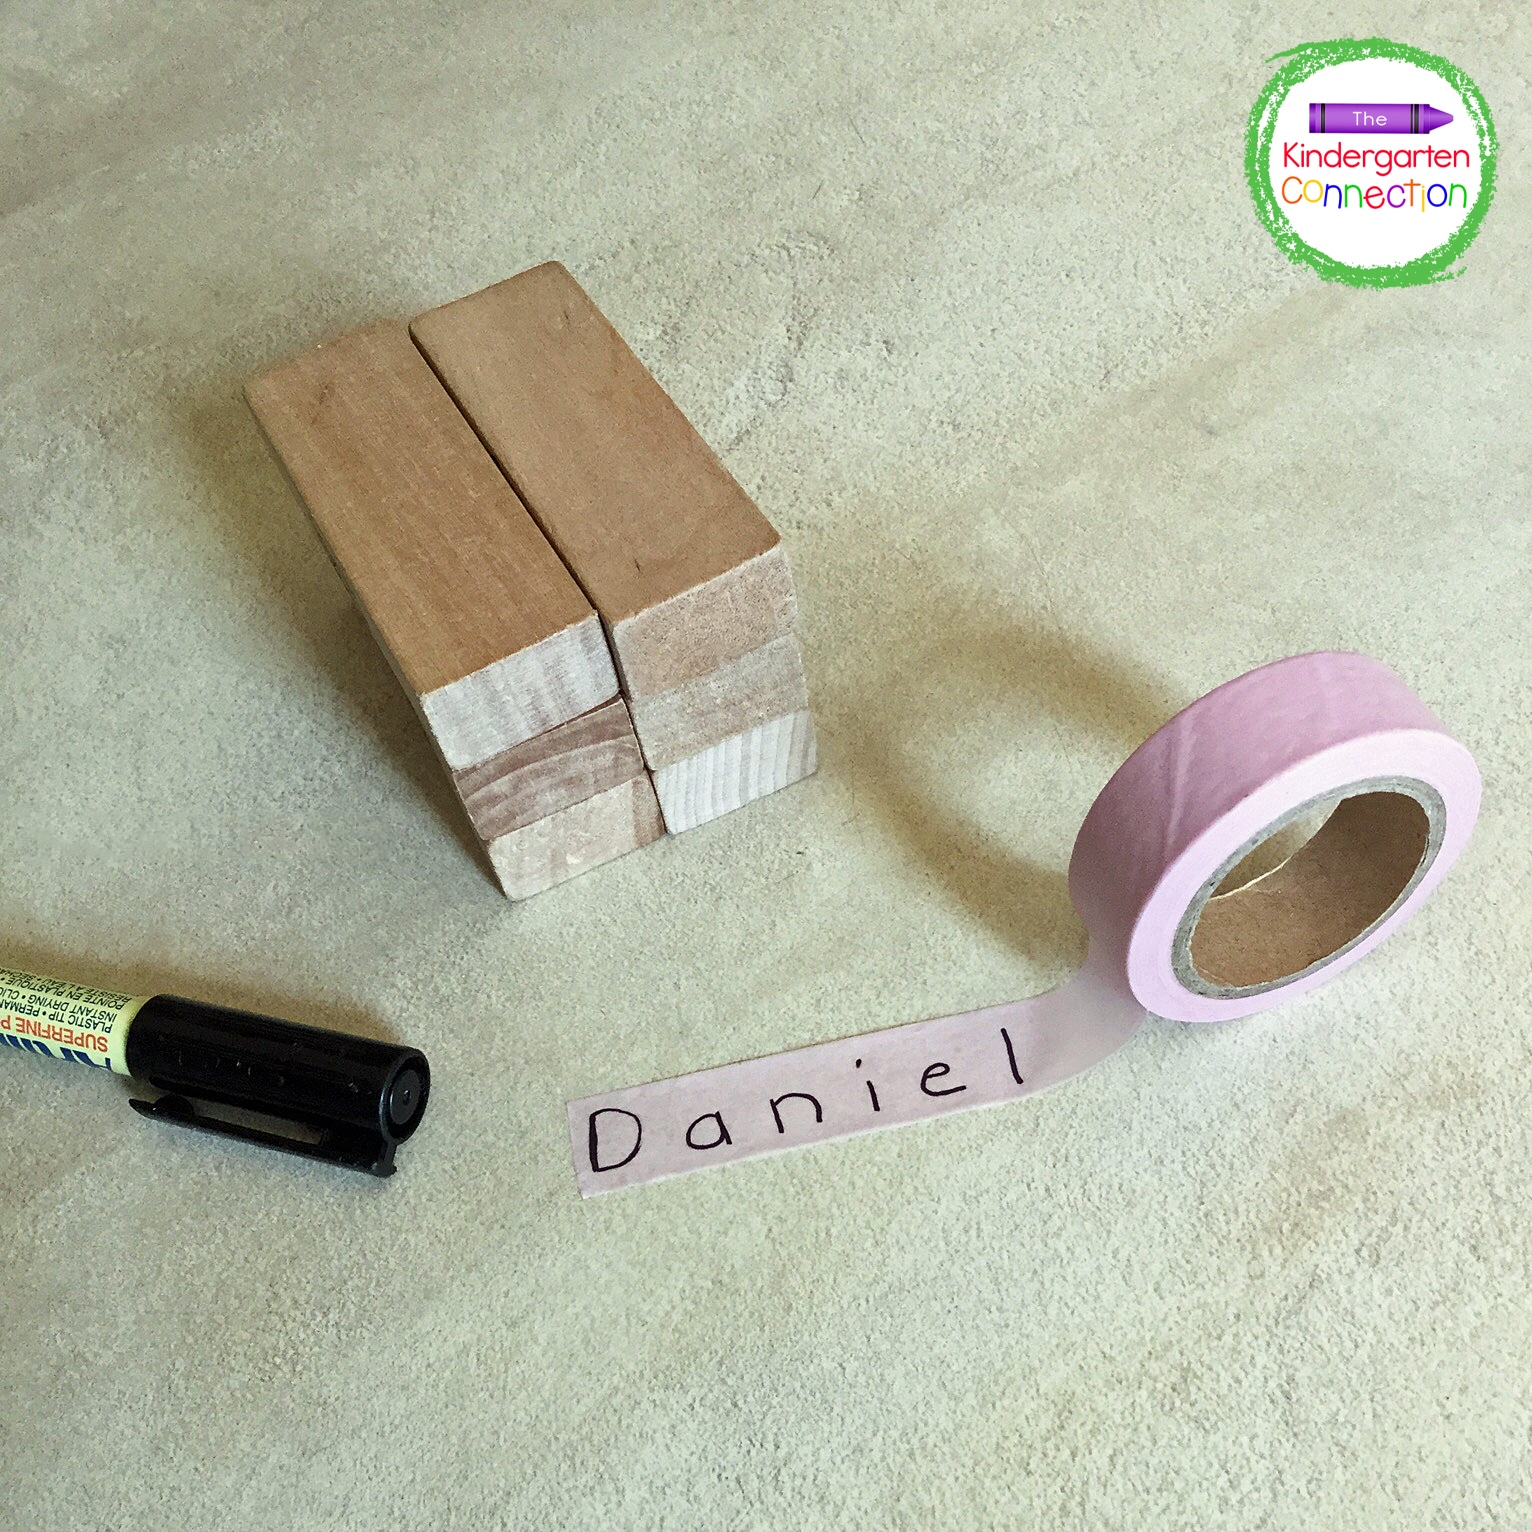 To start, write the name of each child on a piece of masking tape with a permanent marker.